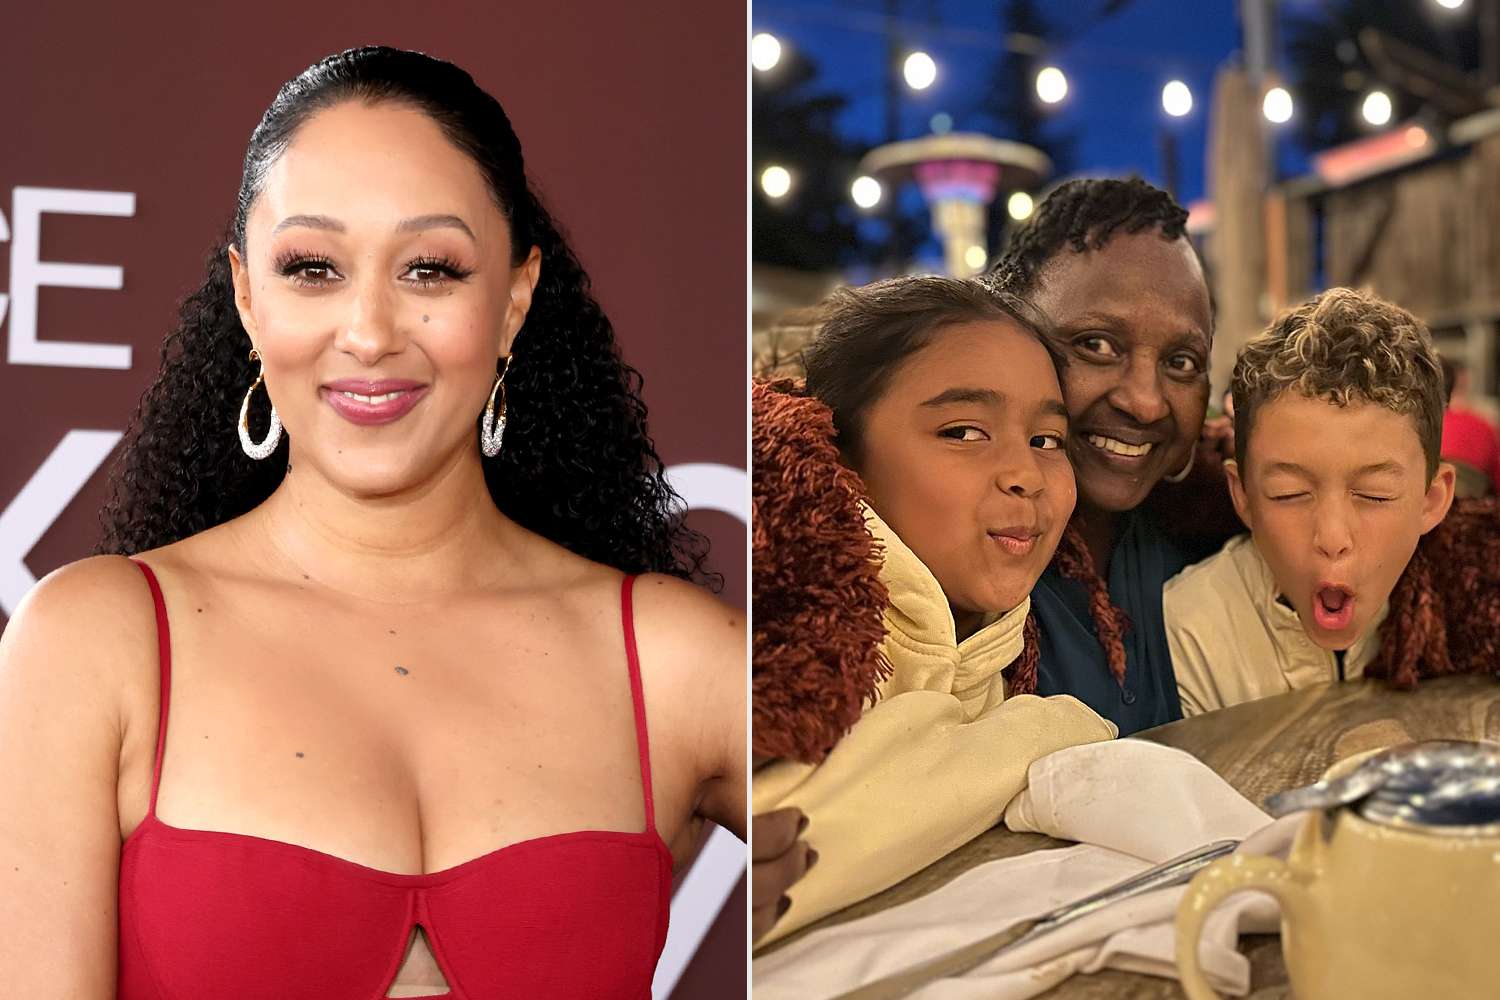 Tamera Mowry-Housley Shares Sweet Photos of Kids with Grandma: 'These Moments are Priceless'